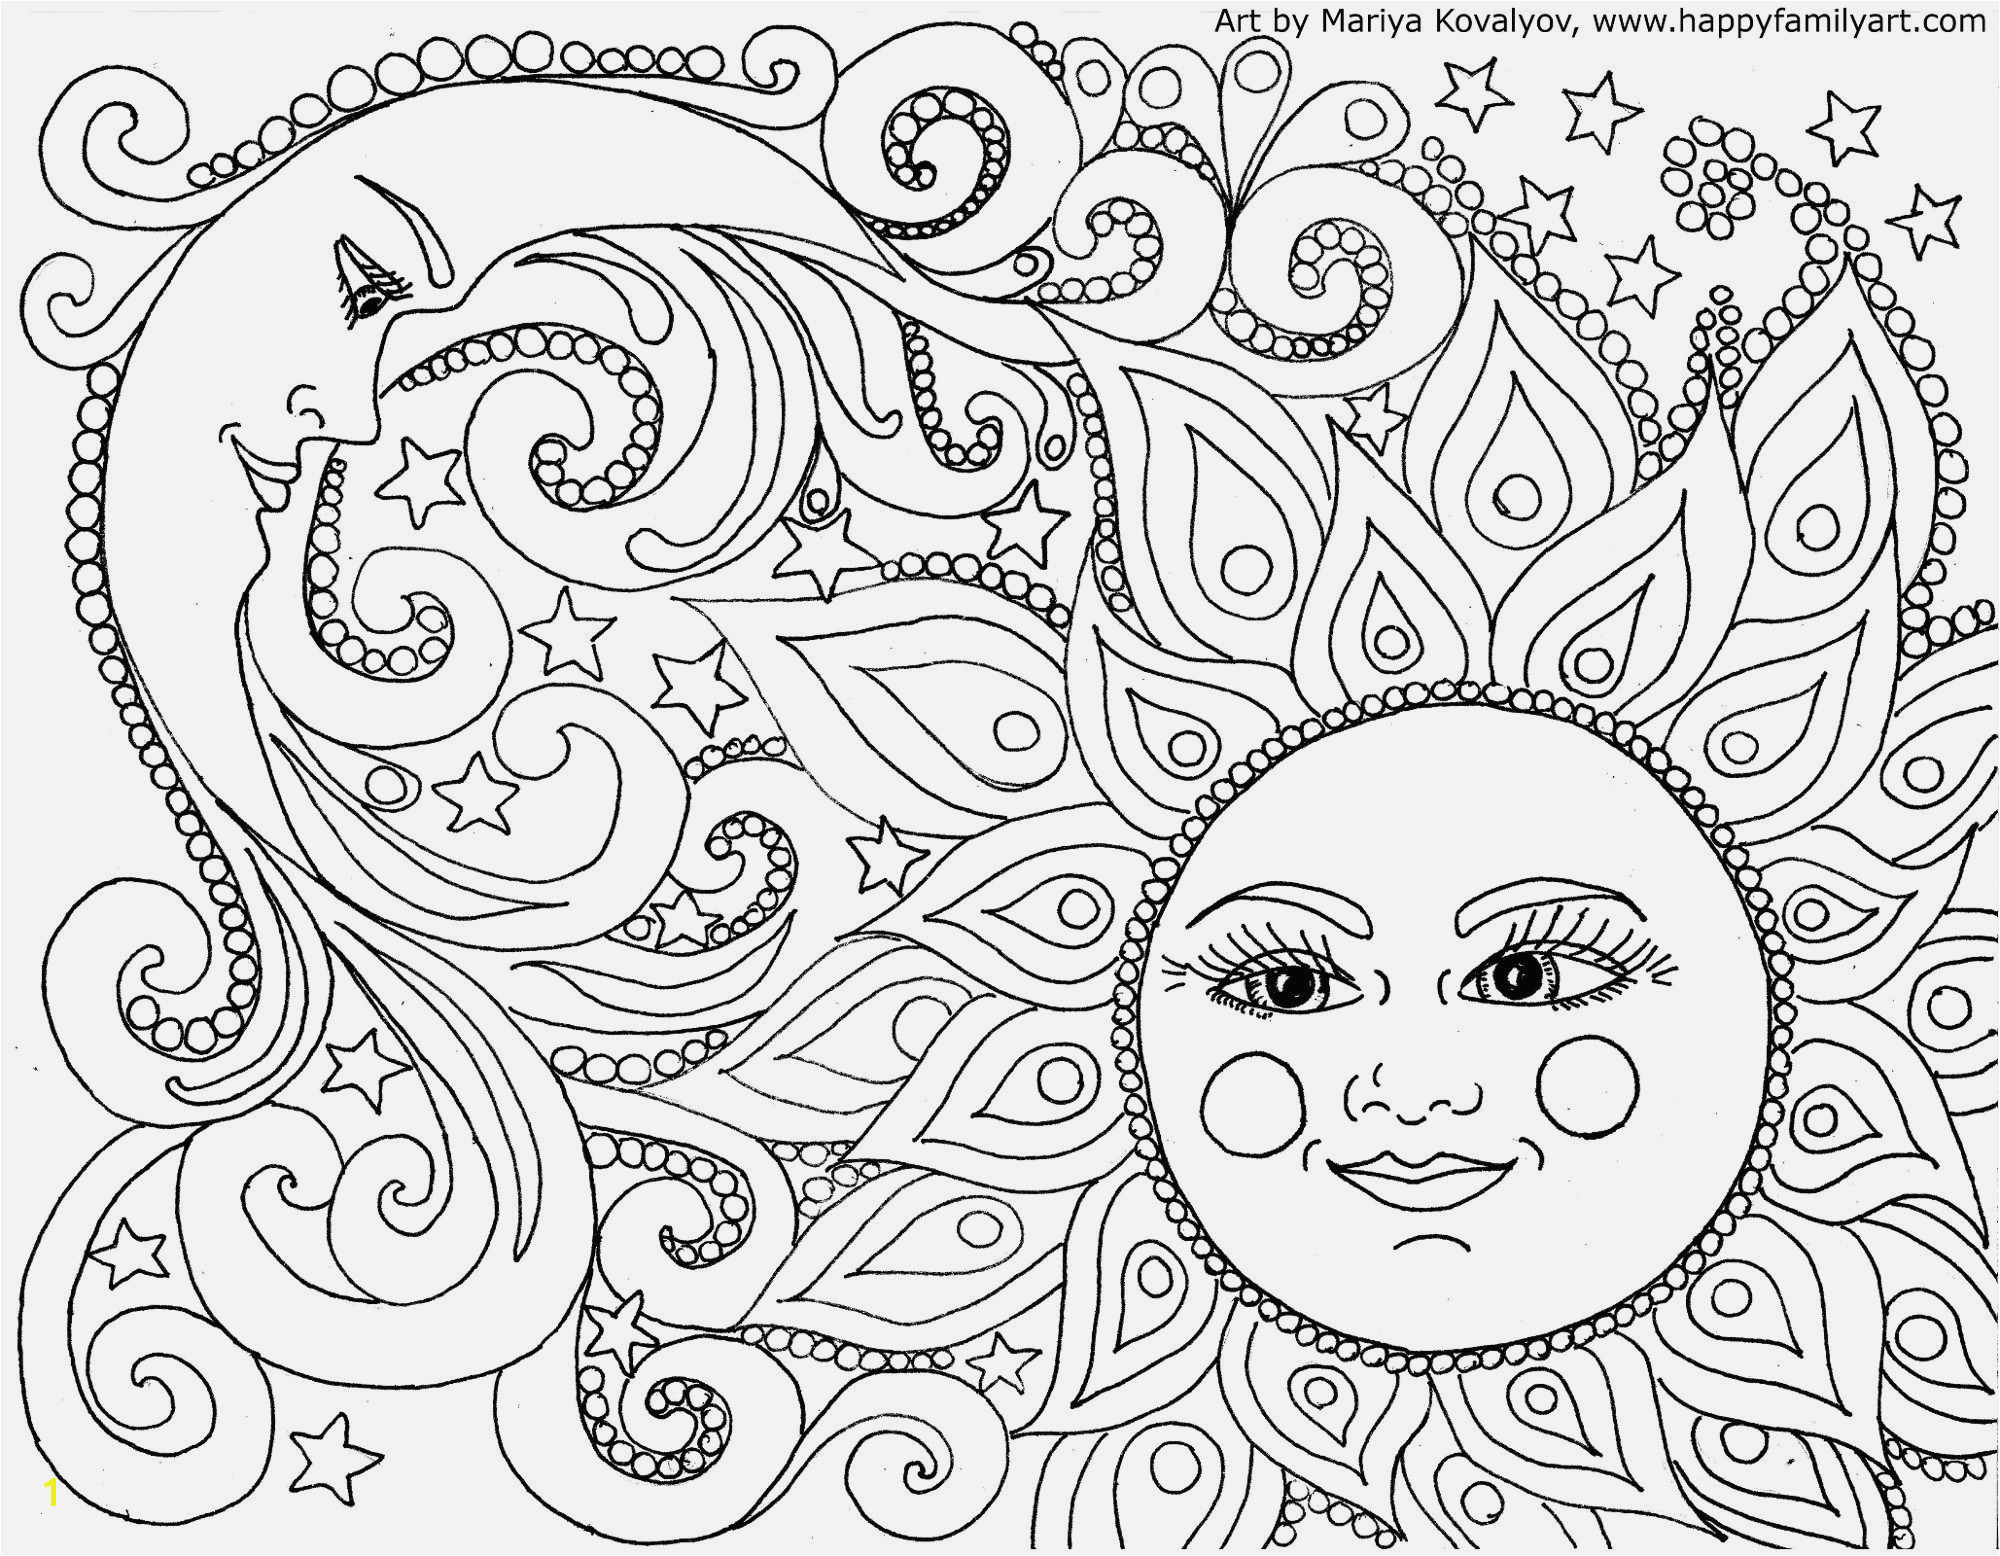 Funny Coloring Pages for Adults Printable Coloring Pages Adult Coloring Book Pages Beautiful Funny Adult Coloring